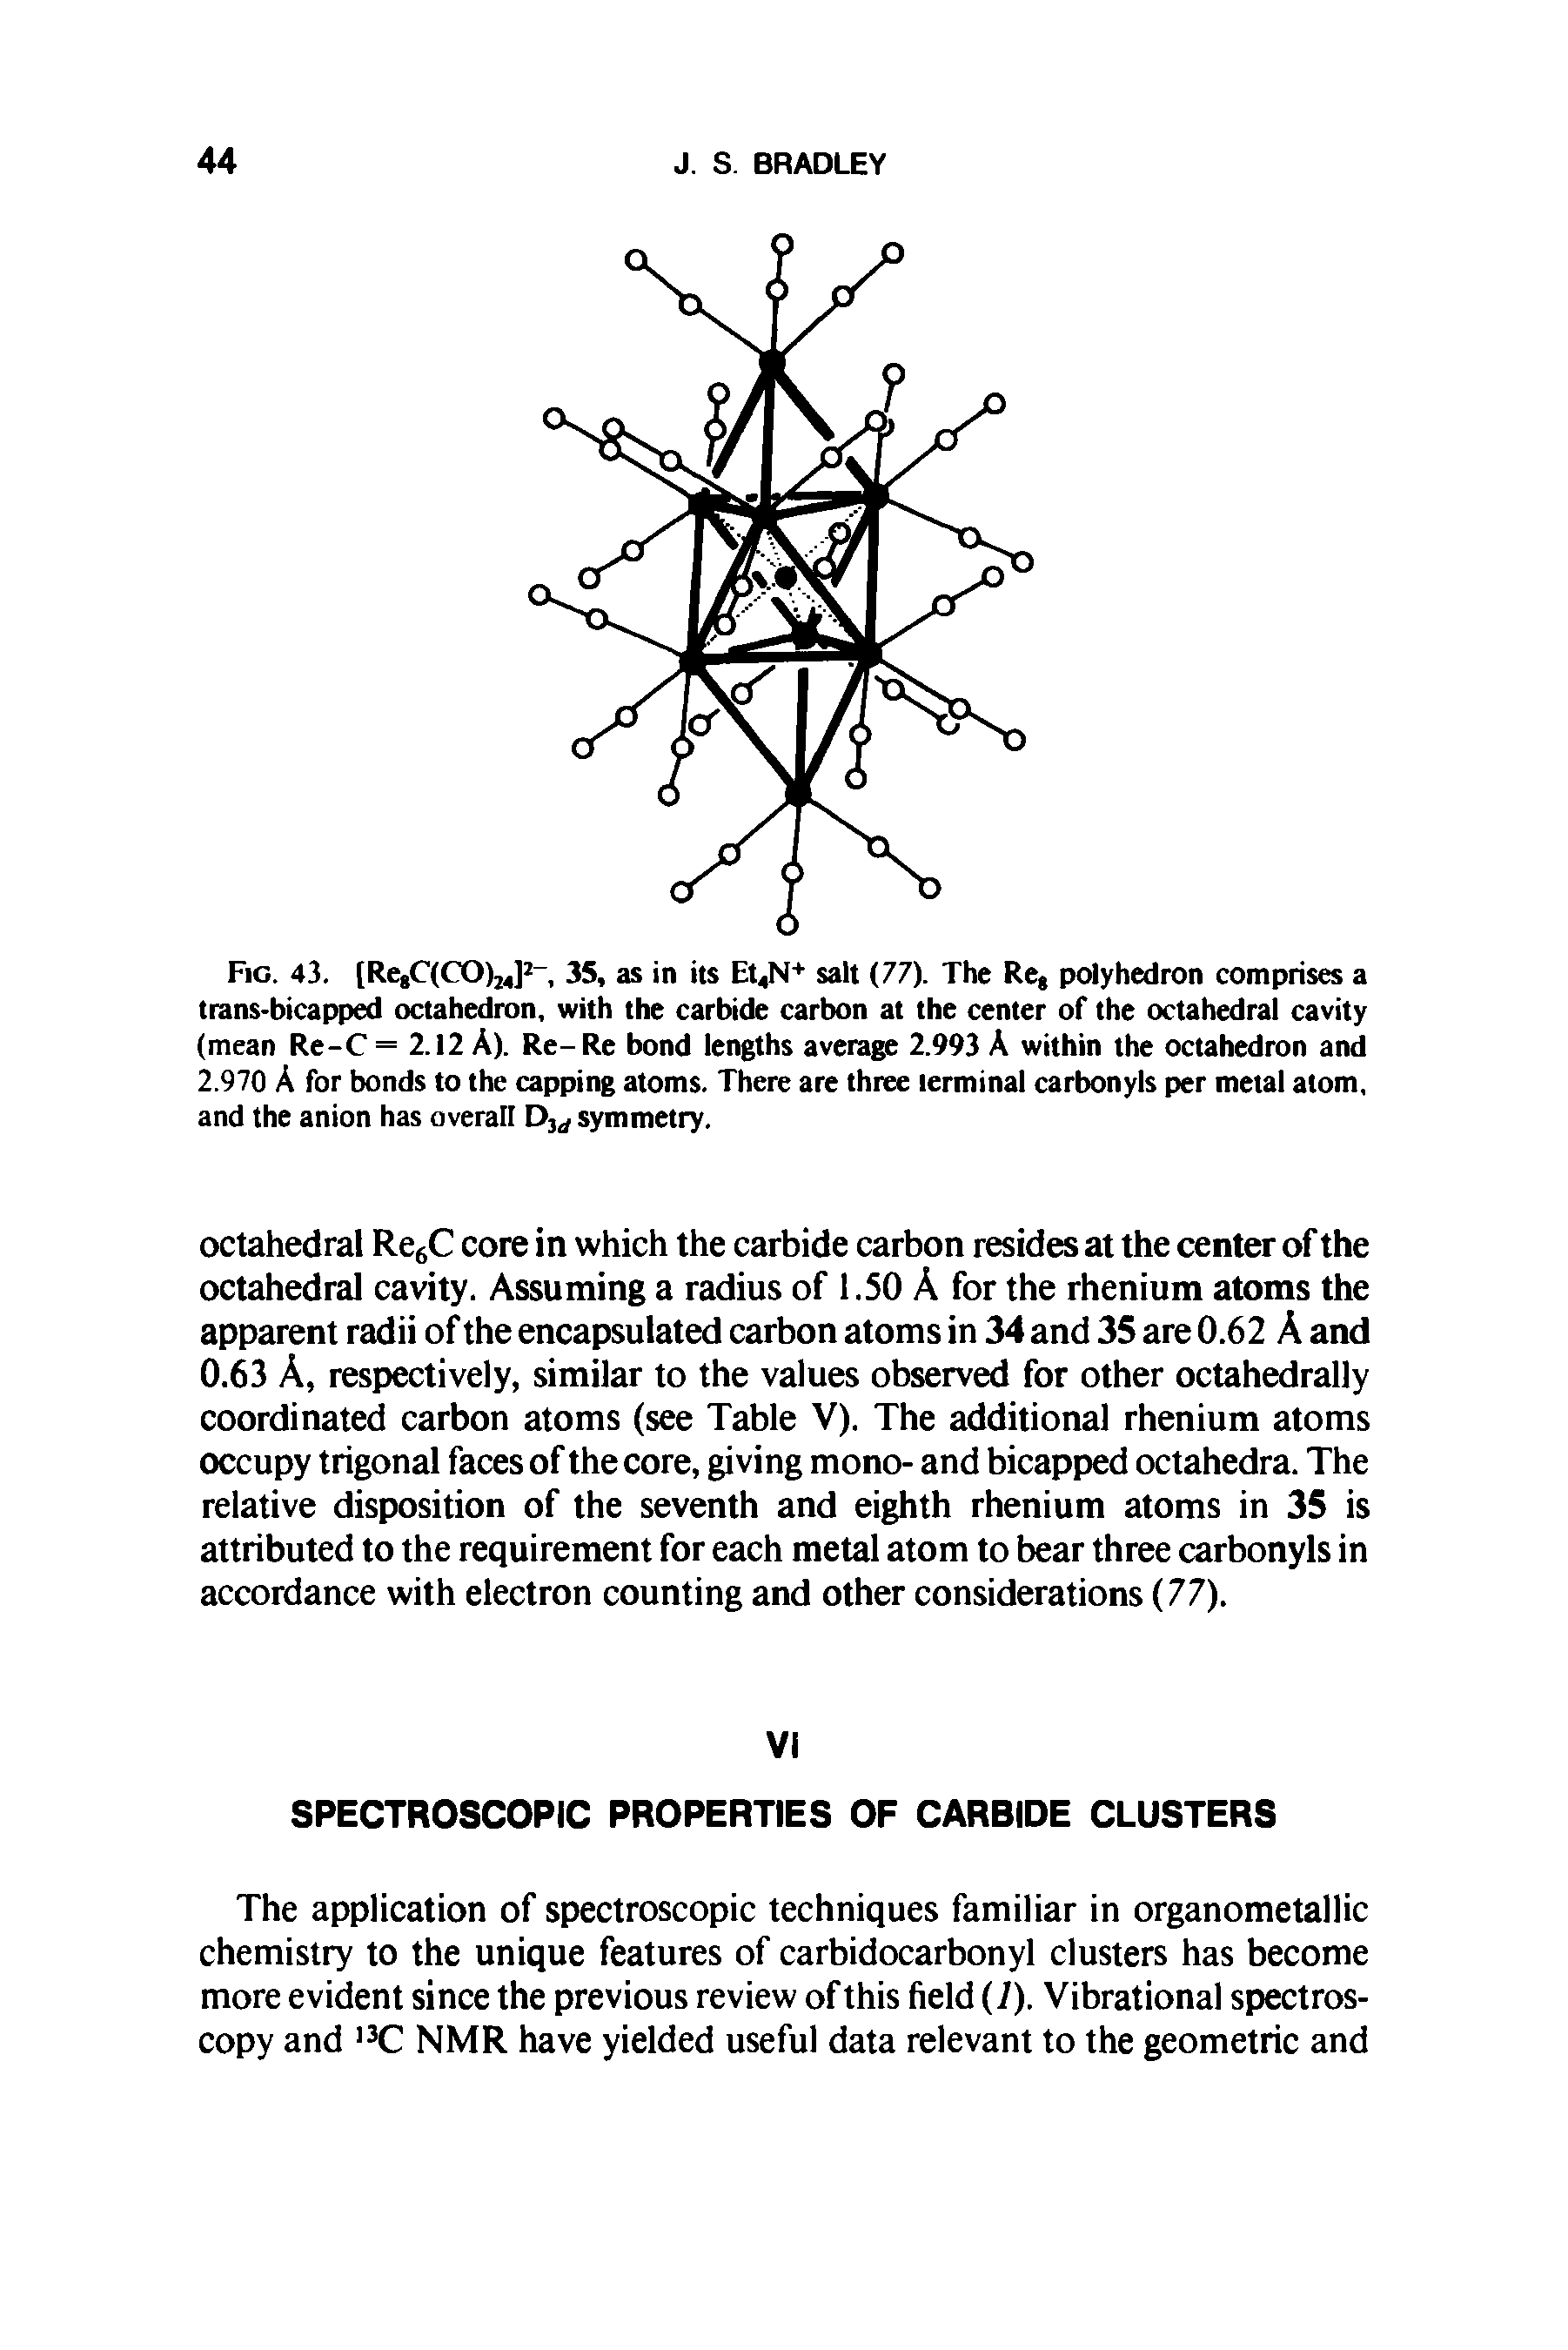 Fig. 43. [Re,C(CO)24p, 35, as in its Et4N+ salt (77). The Re, polyhedron comprises a trans-bicapped octahedron, with the carbide carbon at the center of the octahedral cavity (mean Re-C = 2.12 A). Re- Re bond lengths average 2.993 A within the octahedron and 2.970 A for bonds to the capping atoms. There are three terminal carbonyls per metal atom, and the anion has overall D d symmetry.